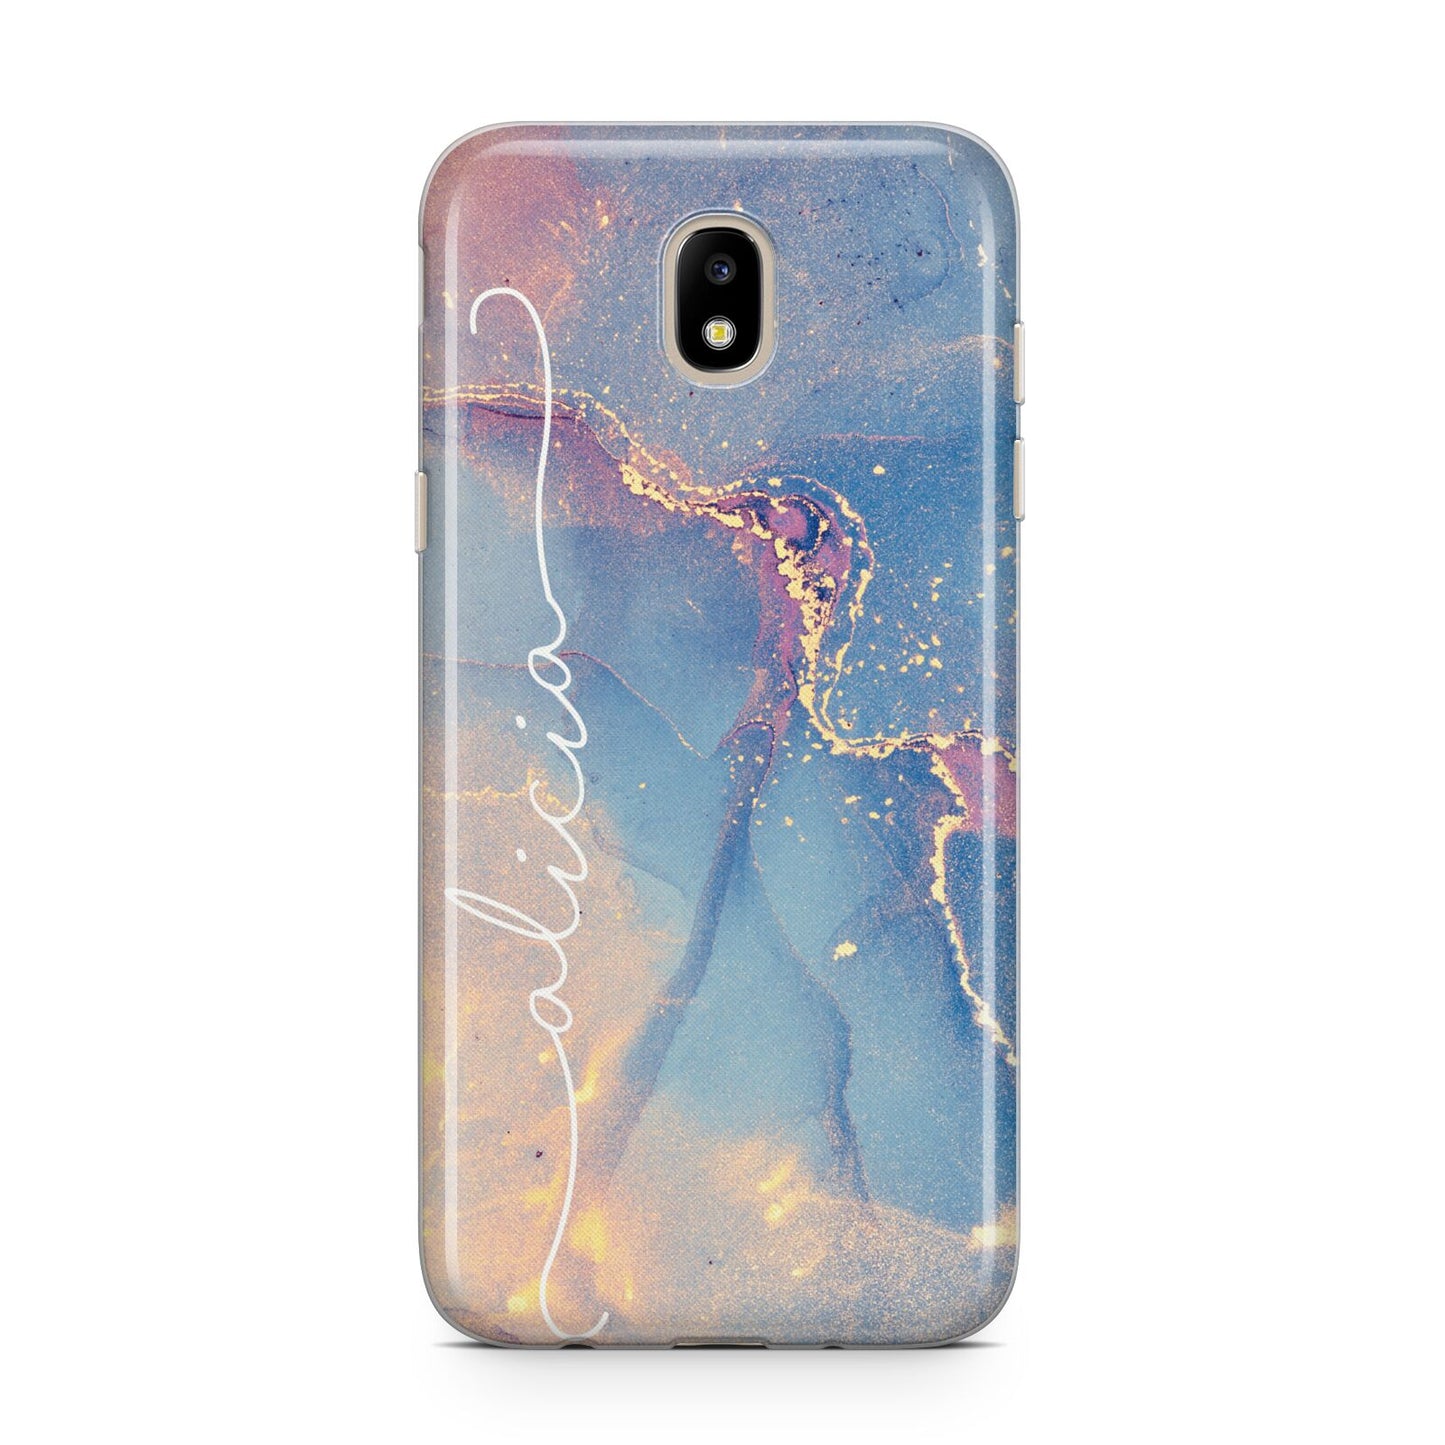 Blue and Pink Marble Samsung J5 2017 Case